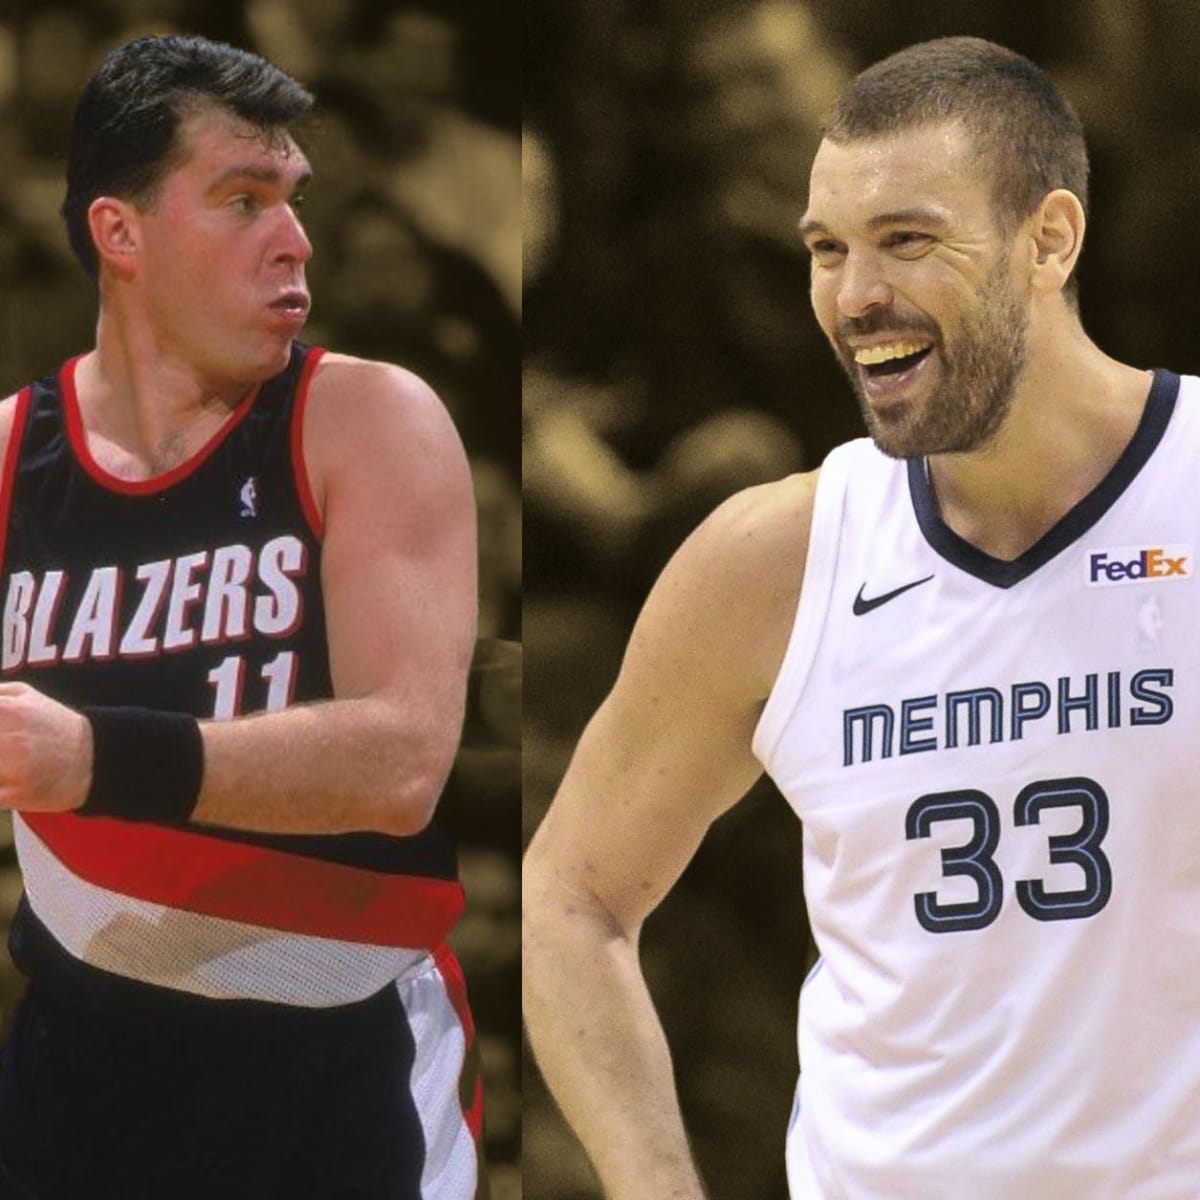 Is Marc Gasol in his prime? What can we expect next season? - Quora